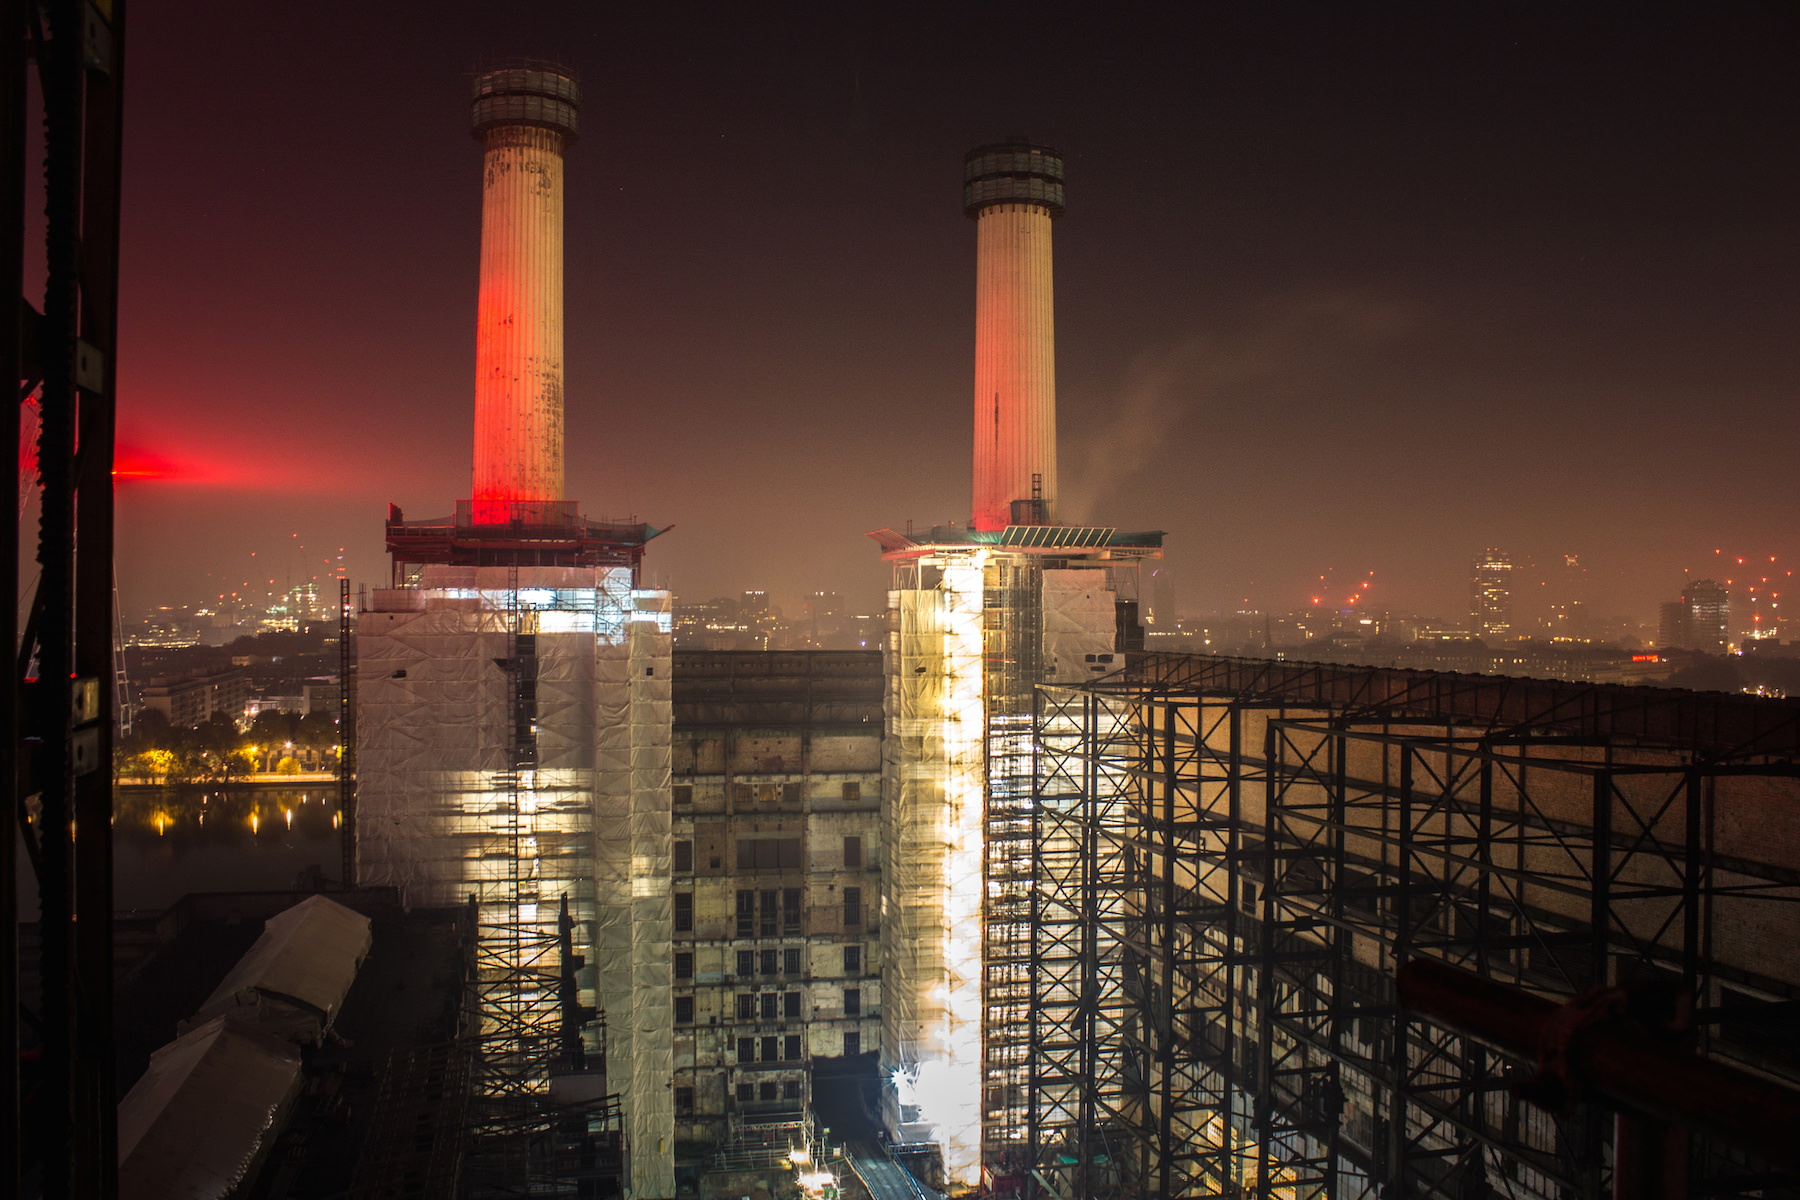 A rooftop view of Battersea Power Station in London, UK.